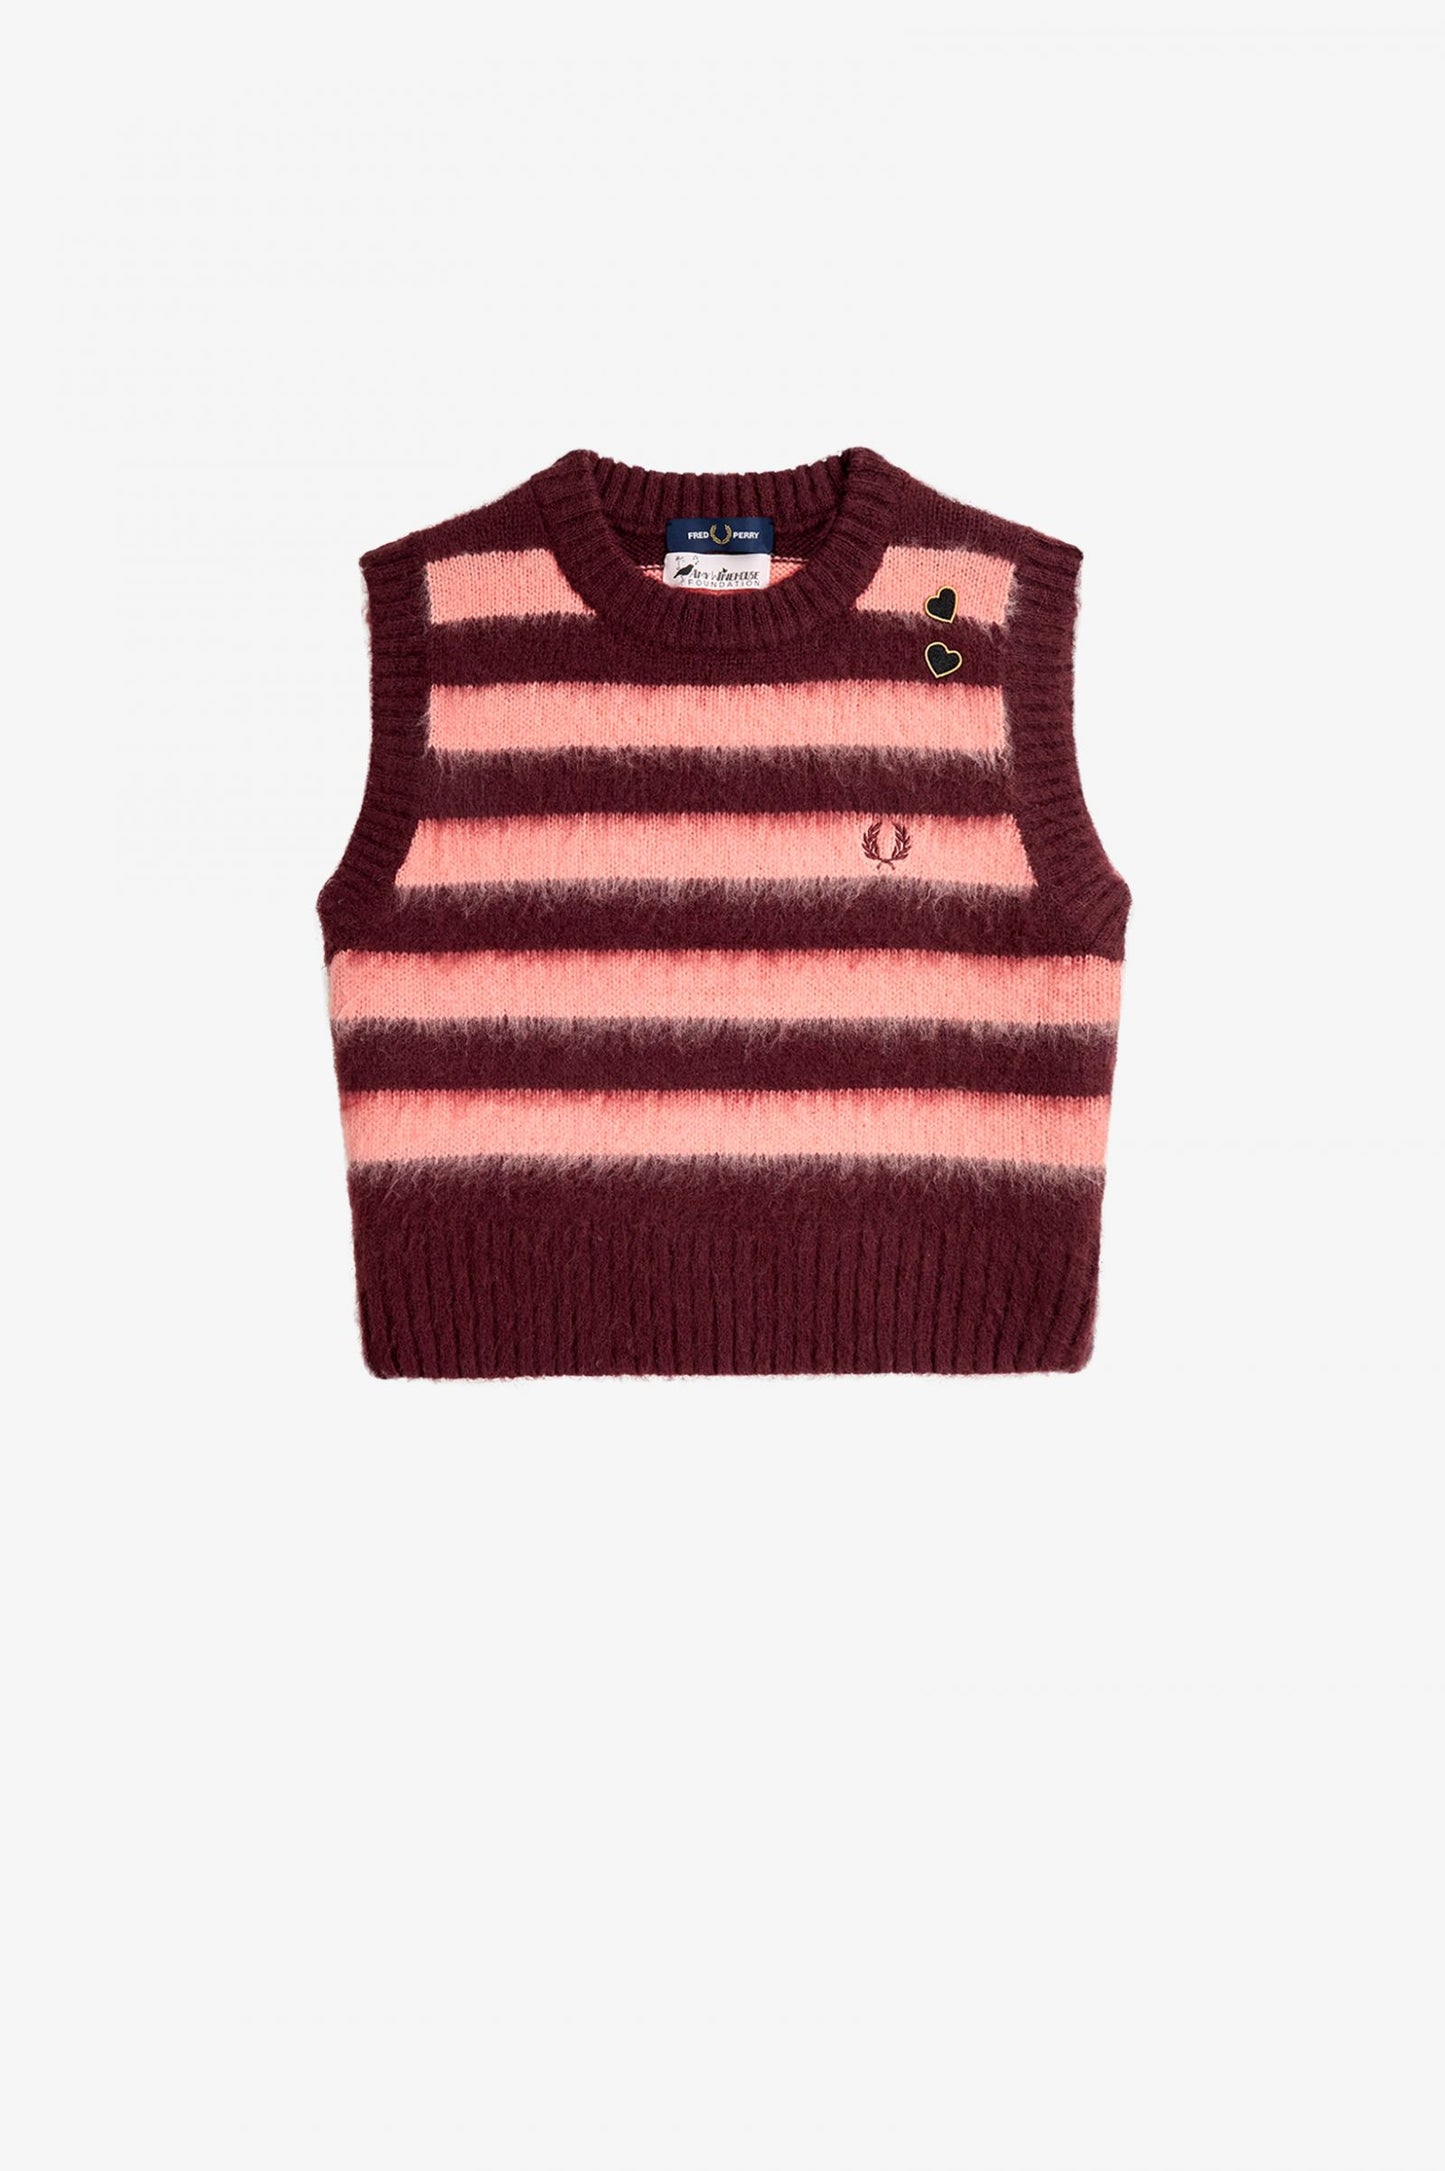 Amy Winehouse Oxblood Striped Knitted Top